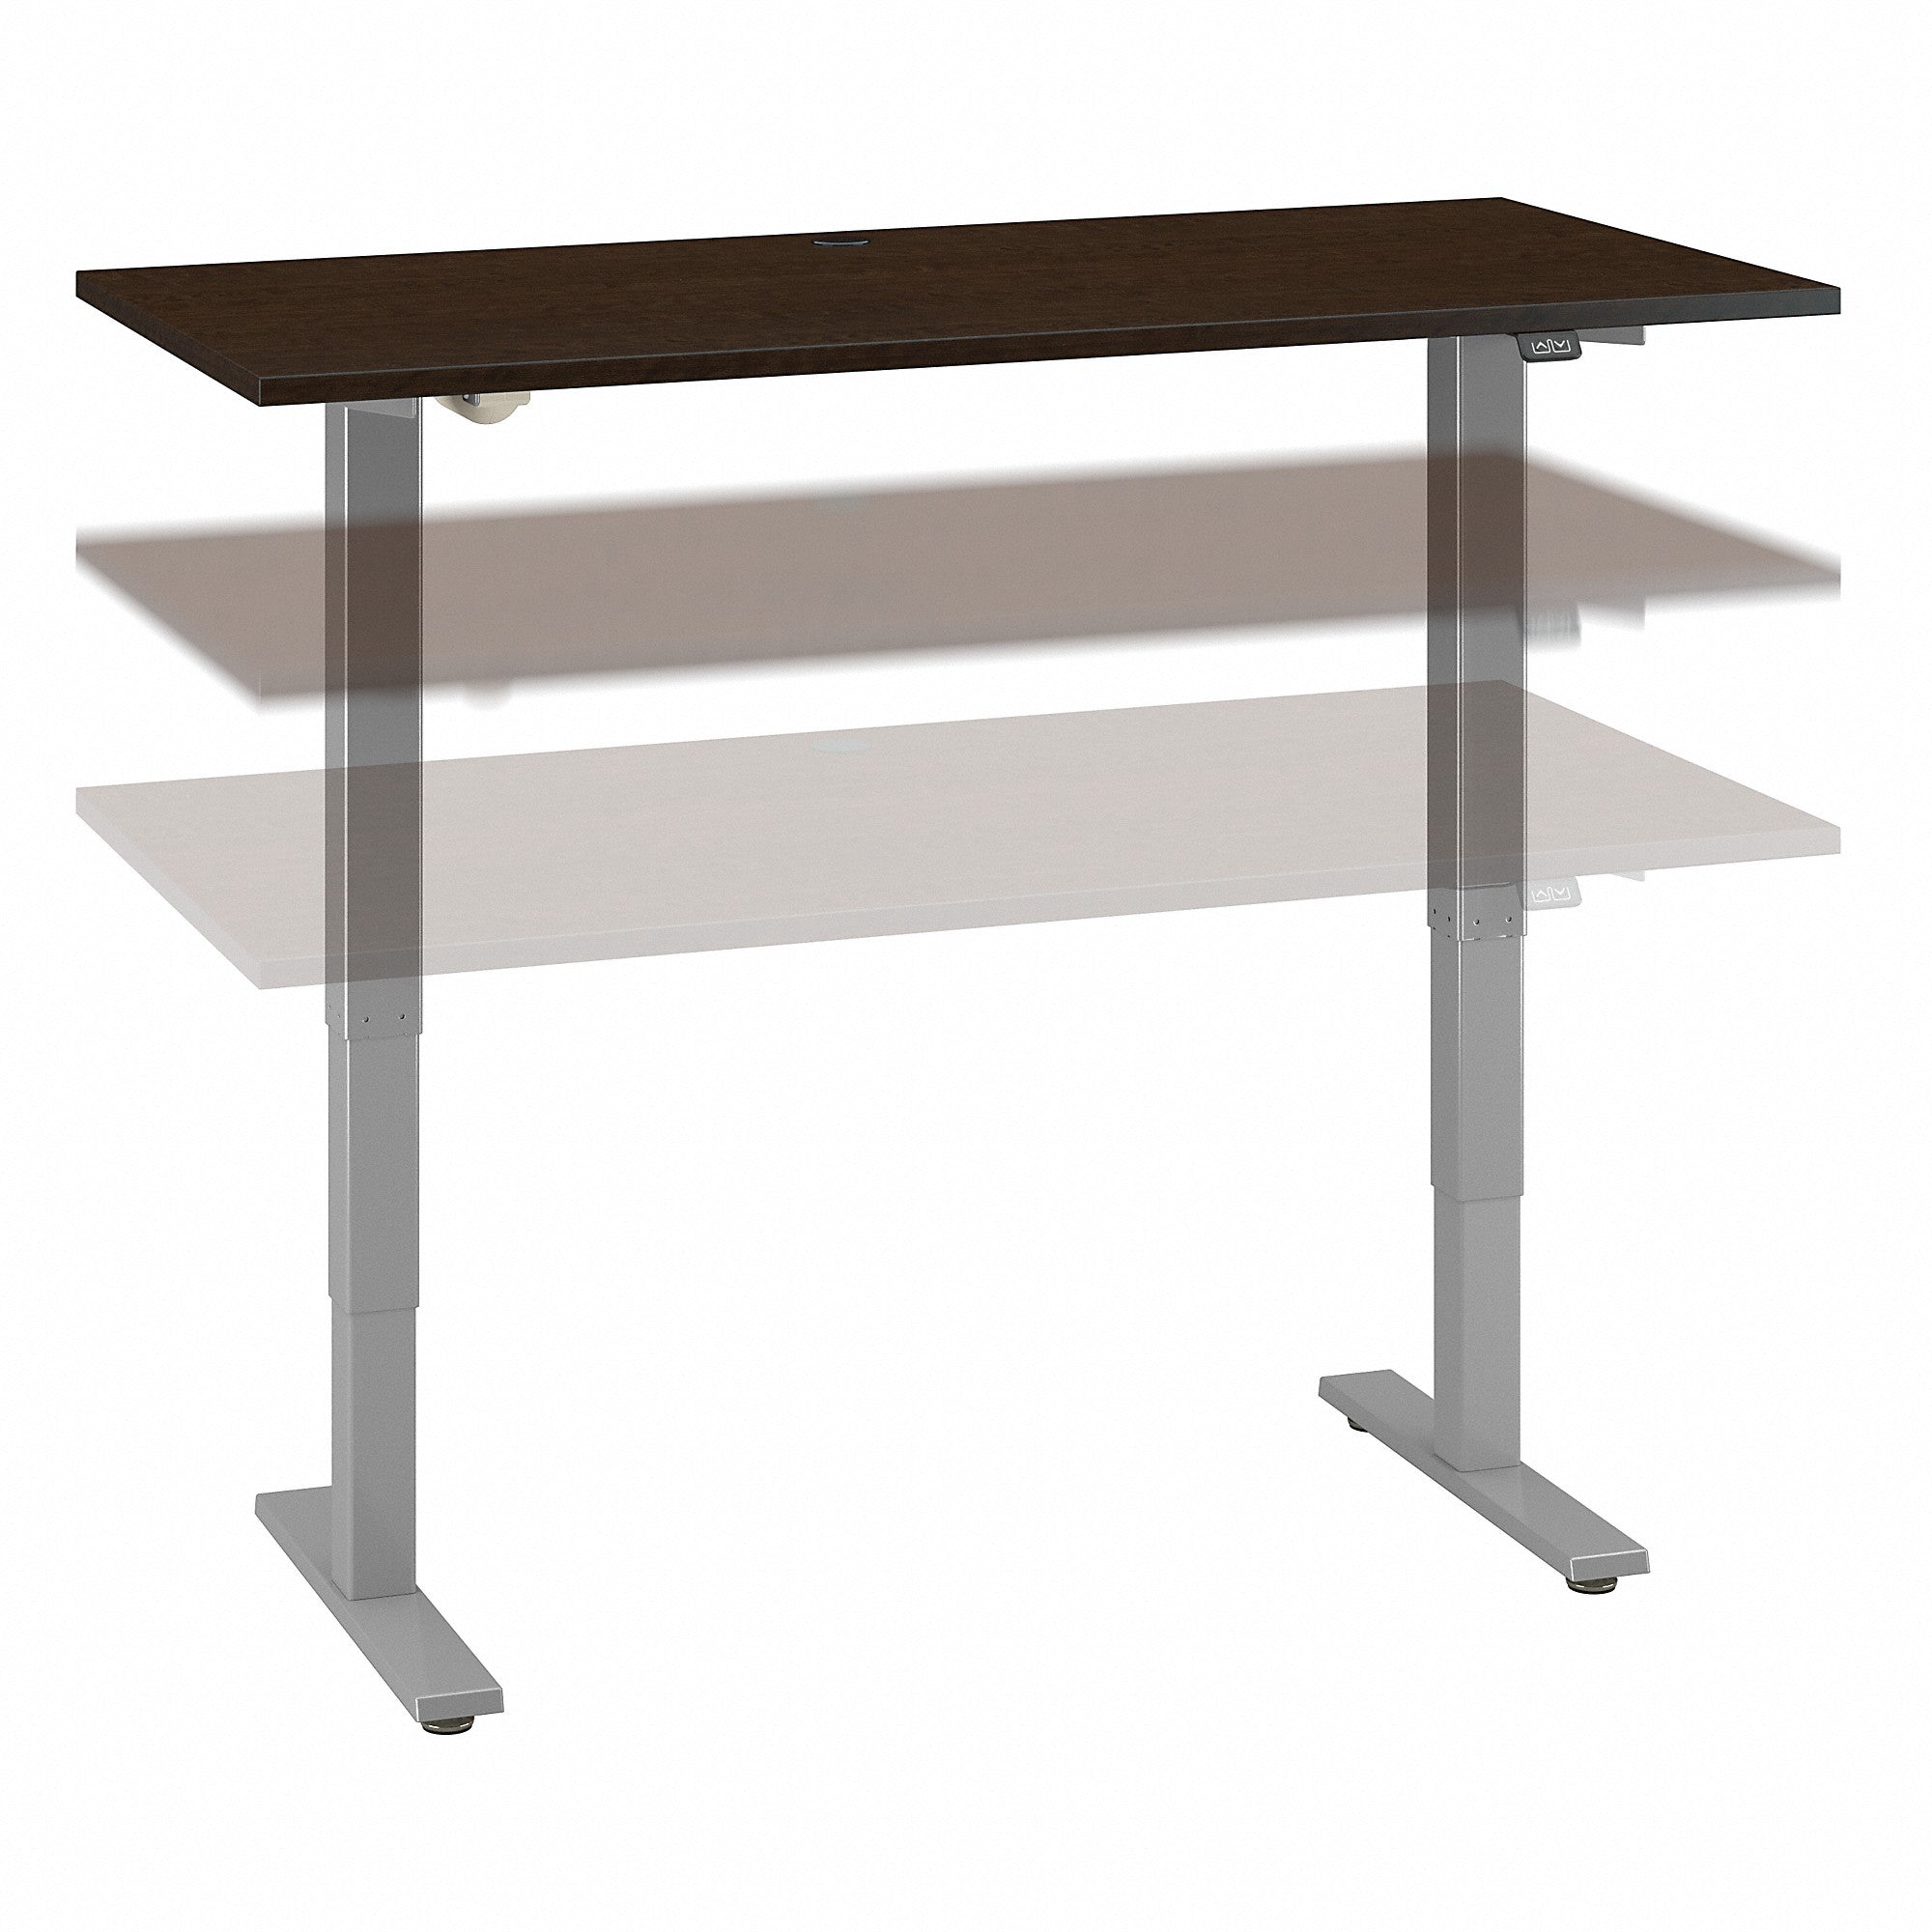 Move 40 Series by Bush Business Furniture 60W x 30D Electric Height Adjustable Standing Desk | Mocha Cherry/Cool Gray Metallic